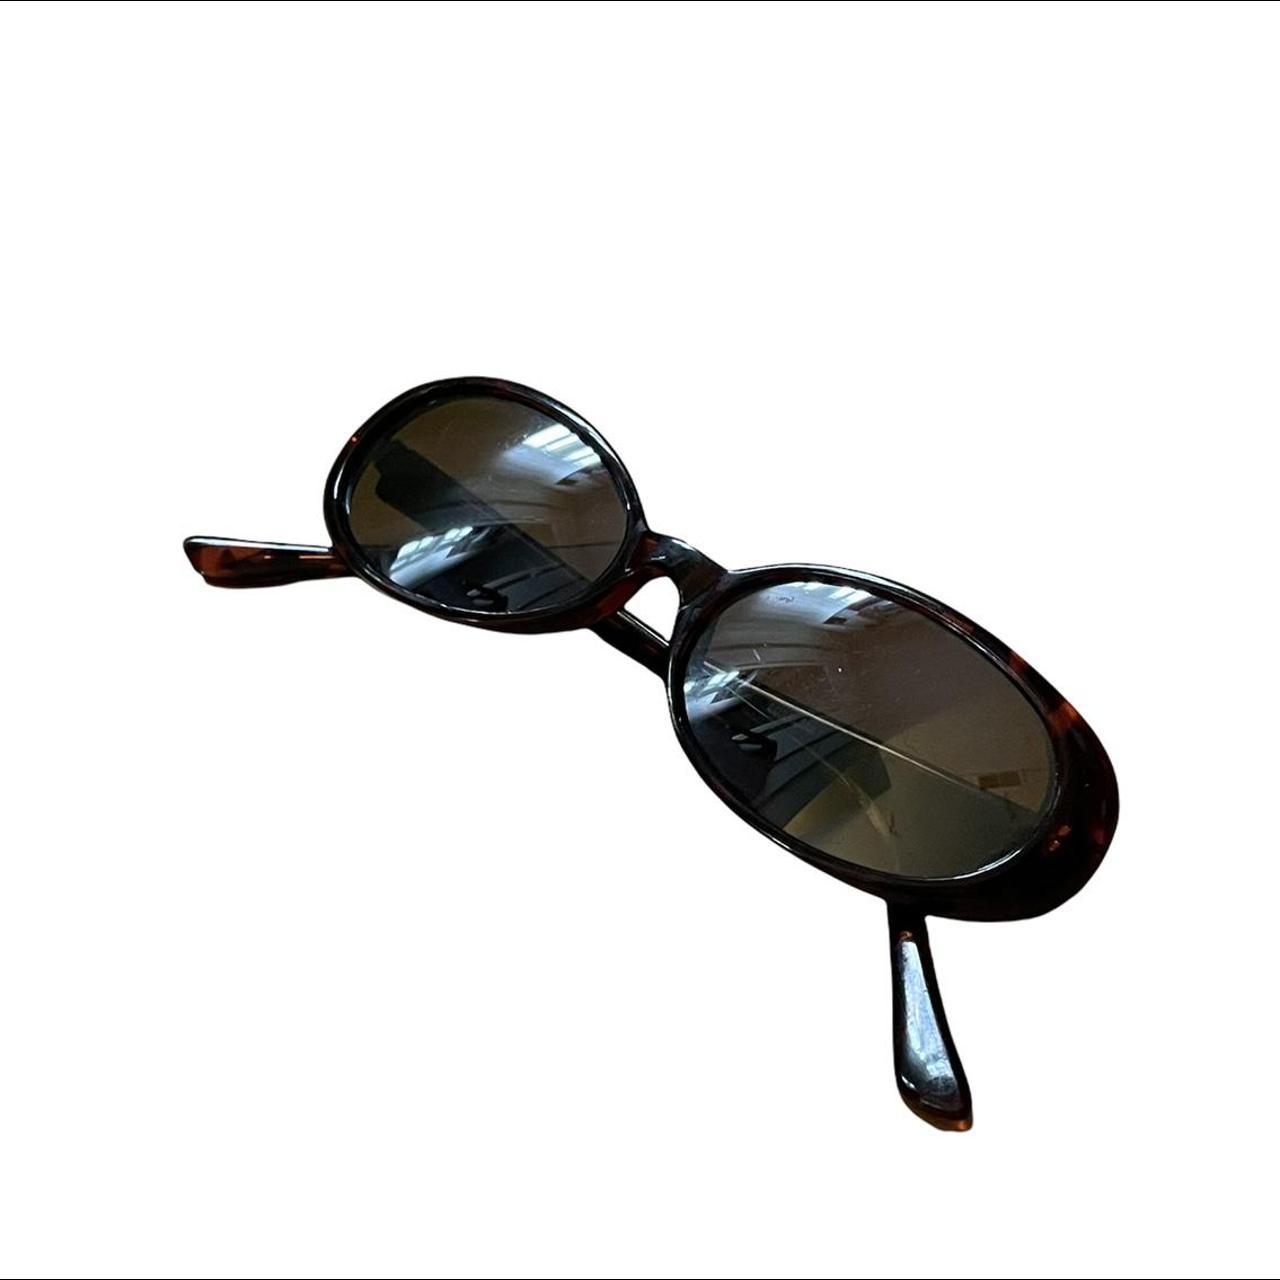 Product Image 1 - vintage oval sunglasses
no brand visible
model